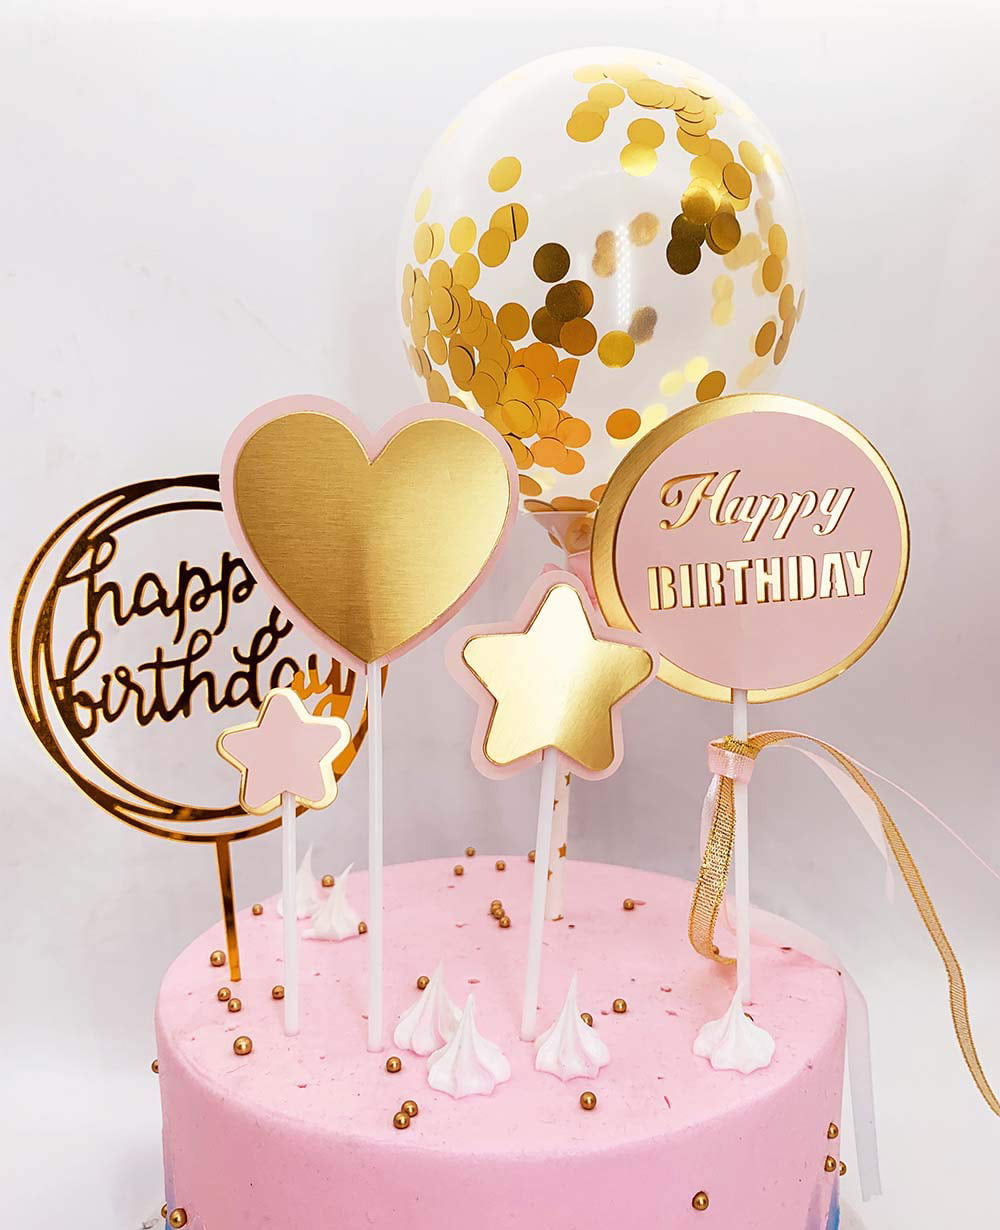 Details about   DeMissir Pack of 6Happy Birthday Cake ToppersA Series of 2 Layers Paper Golde... 